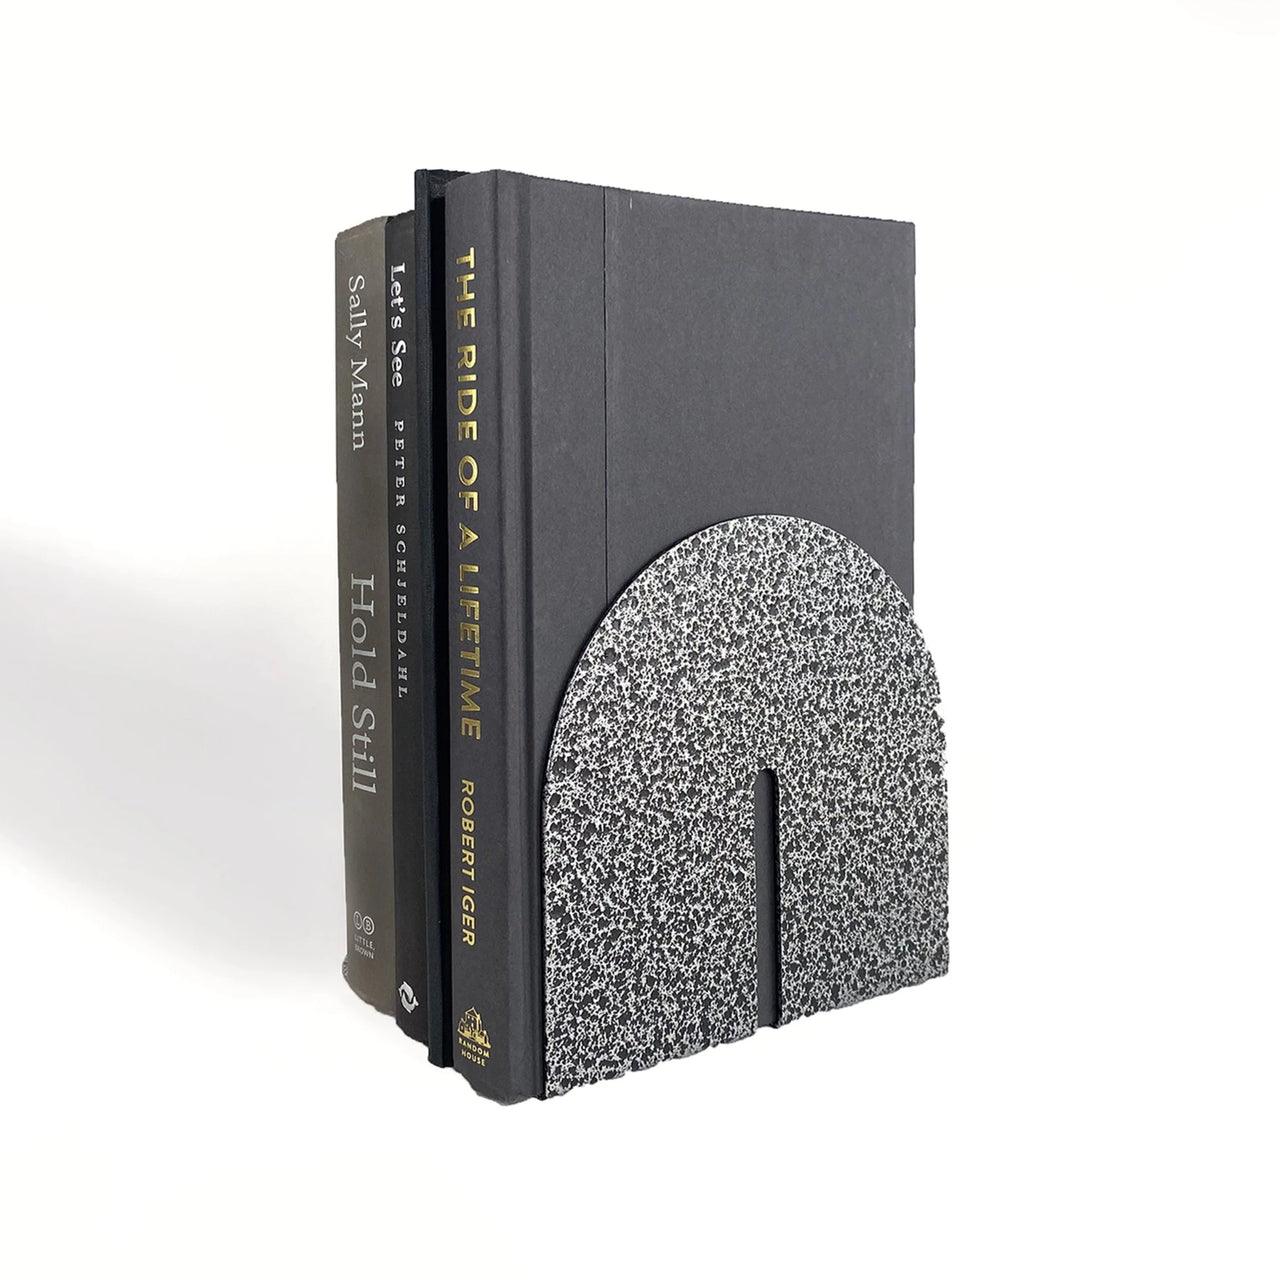 Dumbo Composition Book Bookend - Medium